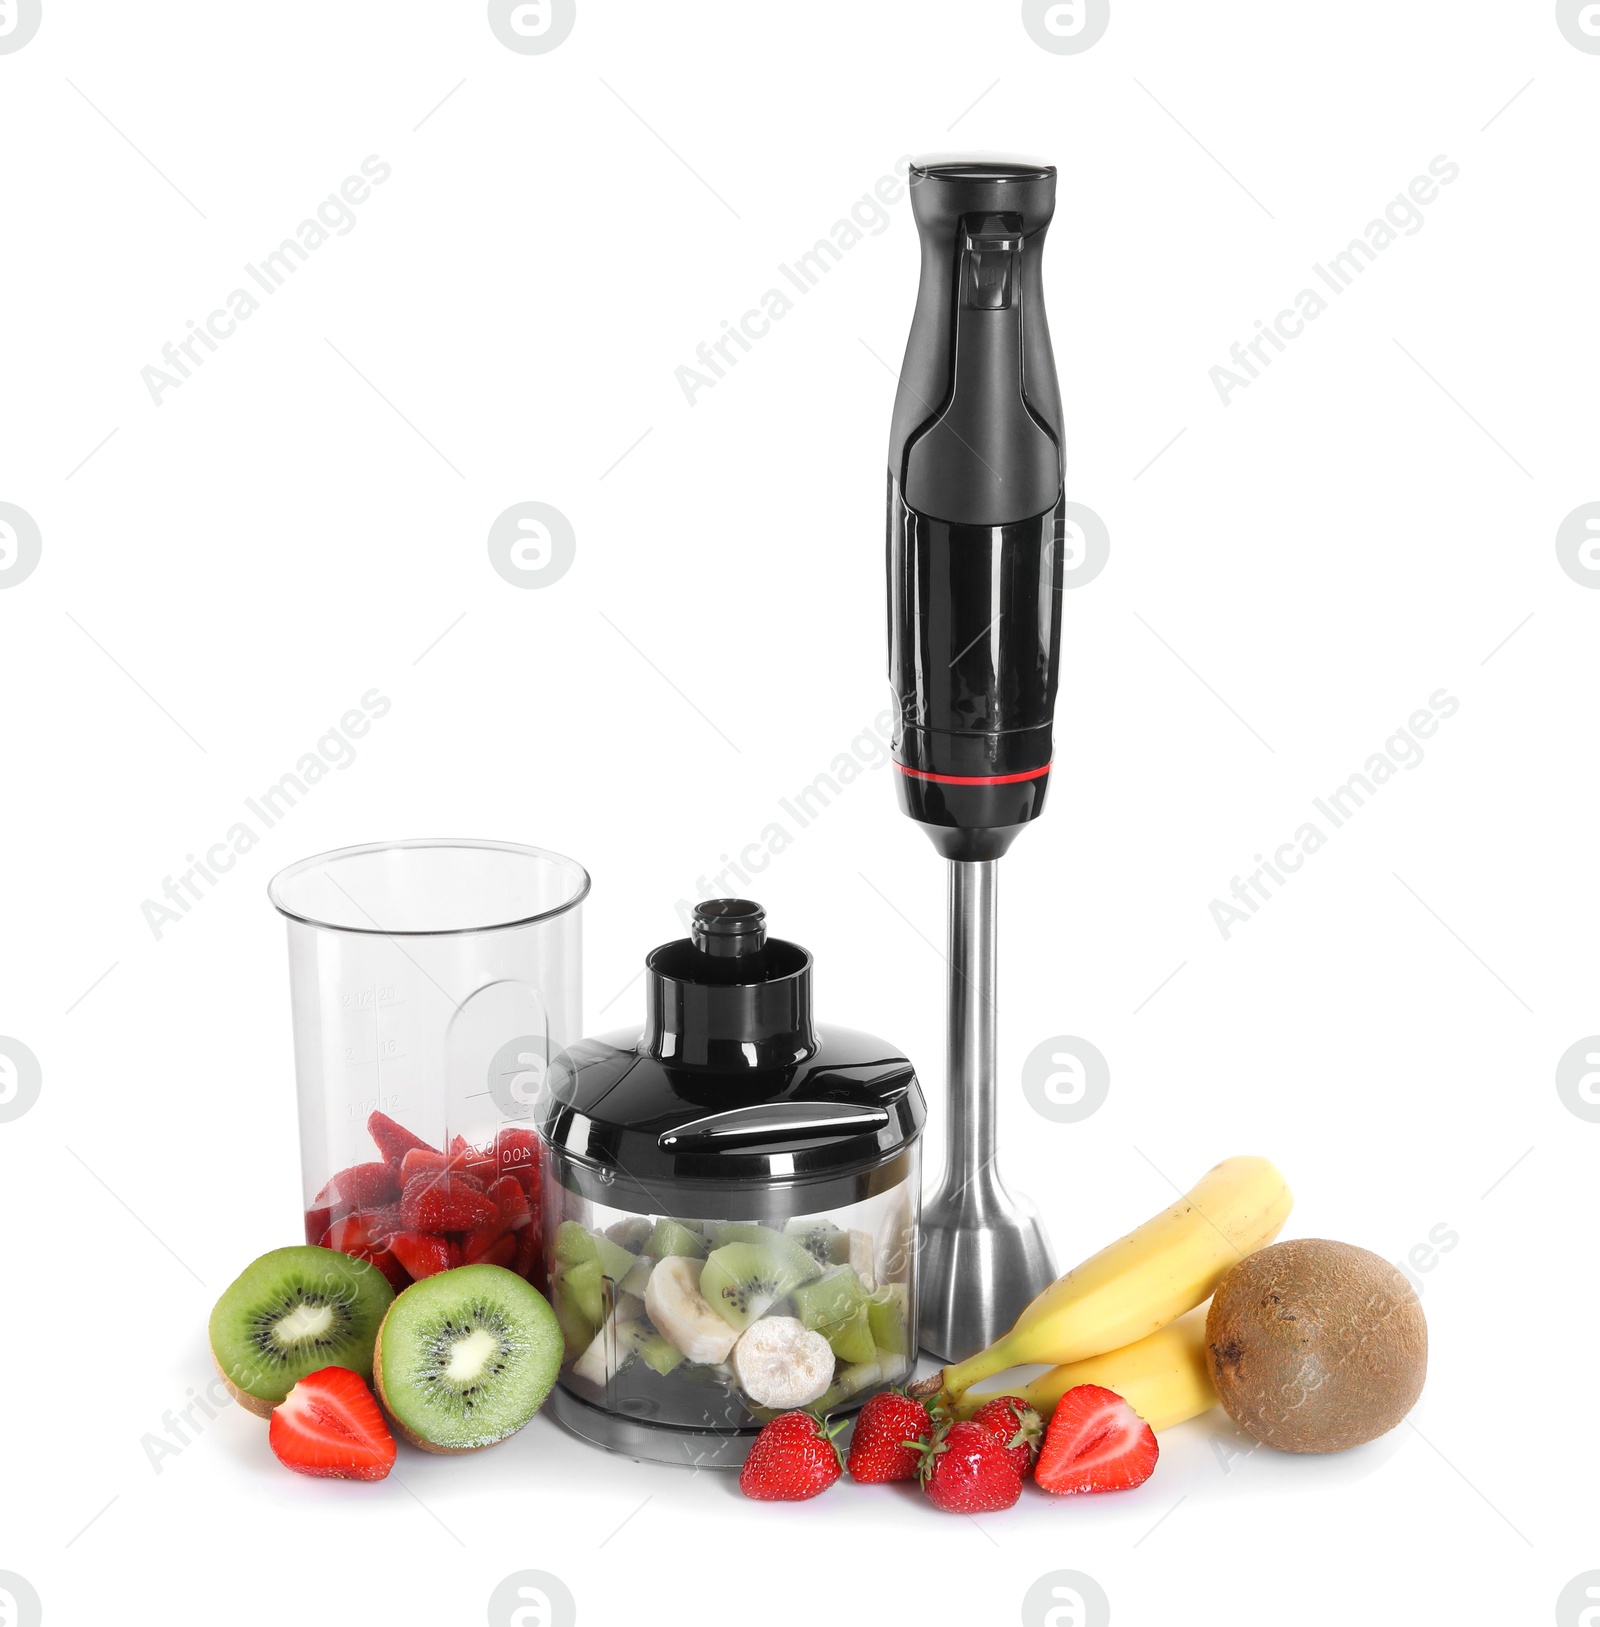 Photo of Hand blender kit, fresh fruits and strawberries isolated on white